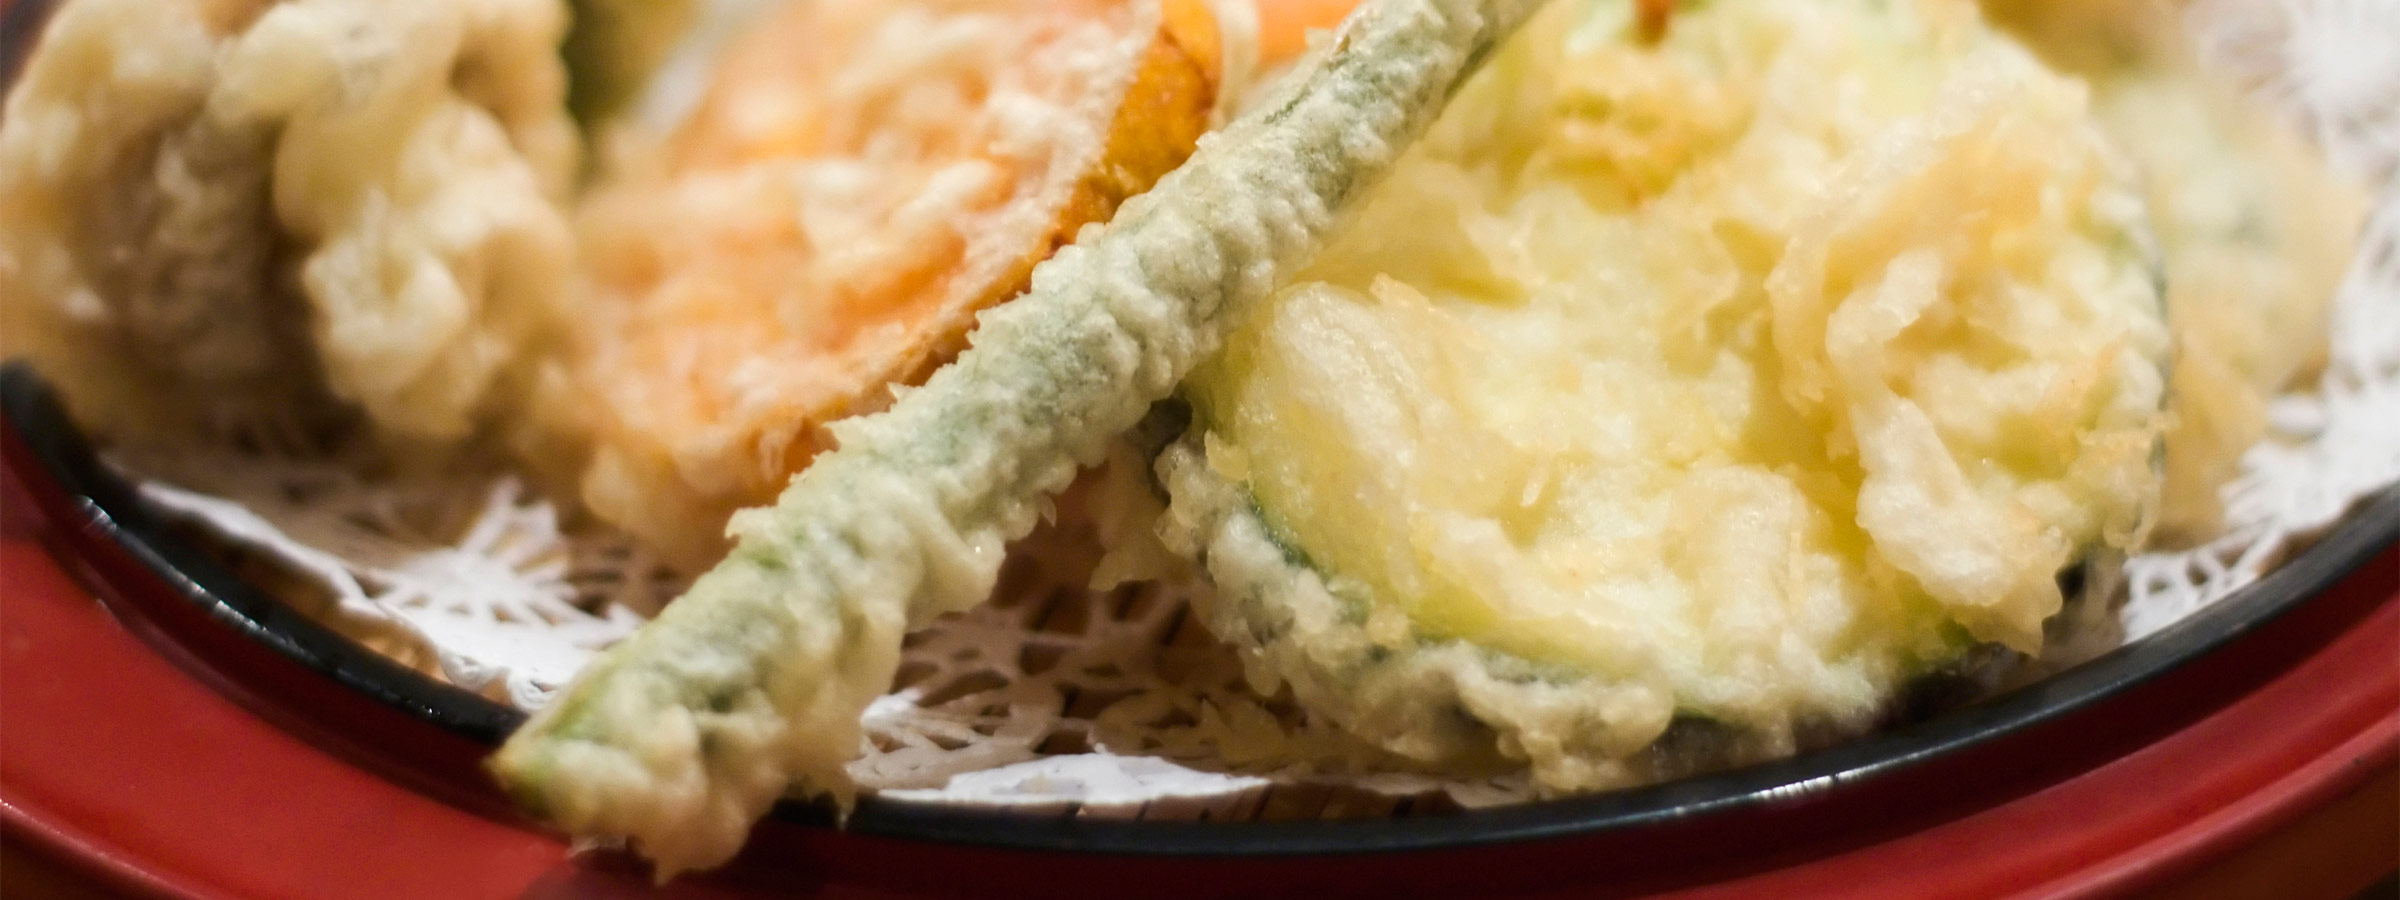 A closeup of a serving of Gluten Free Vegetable Tempura on a black and red plate.